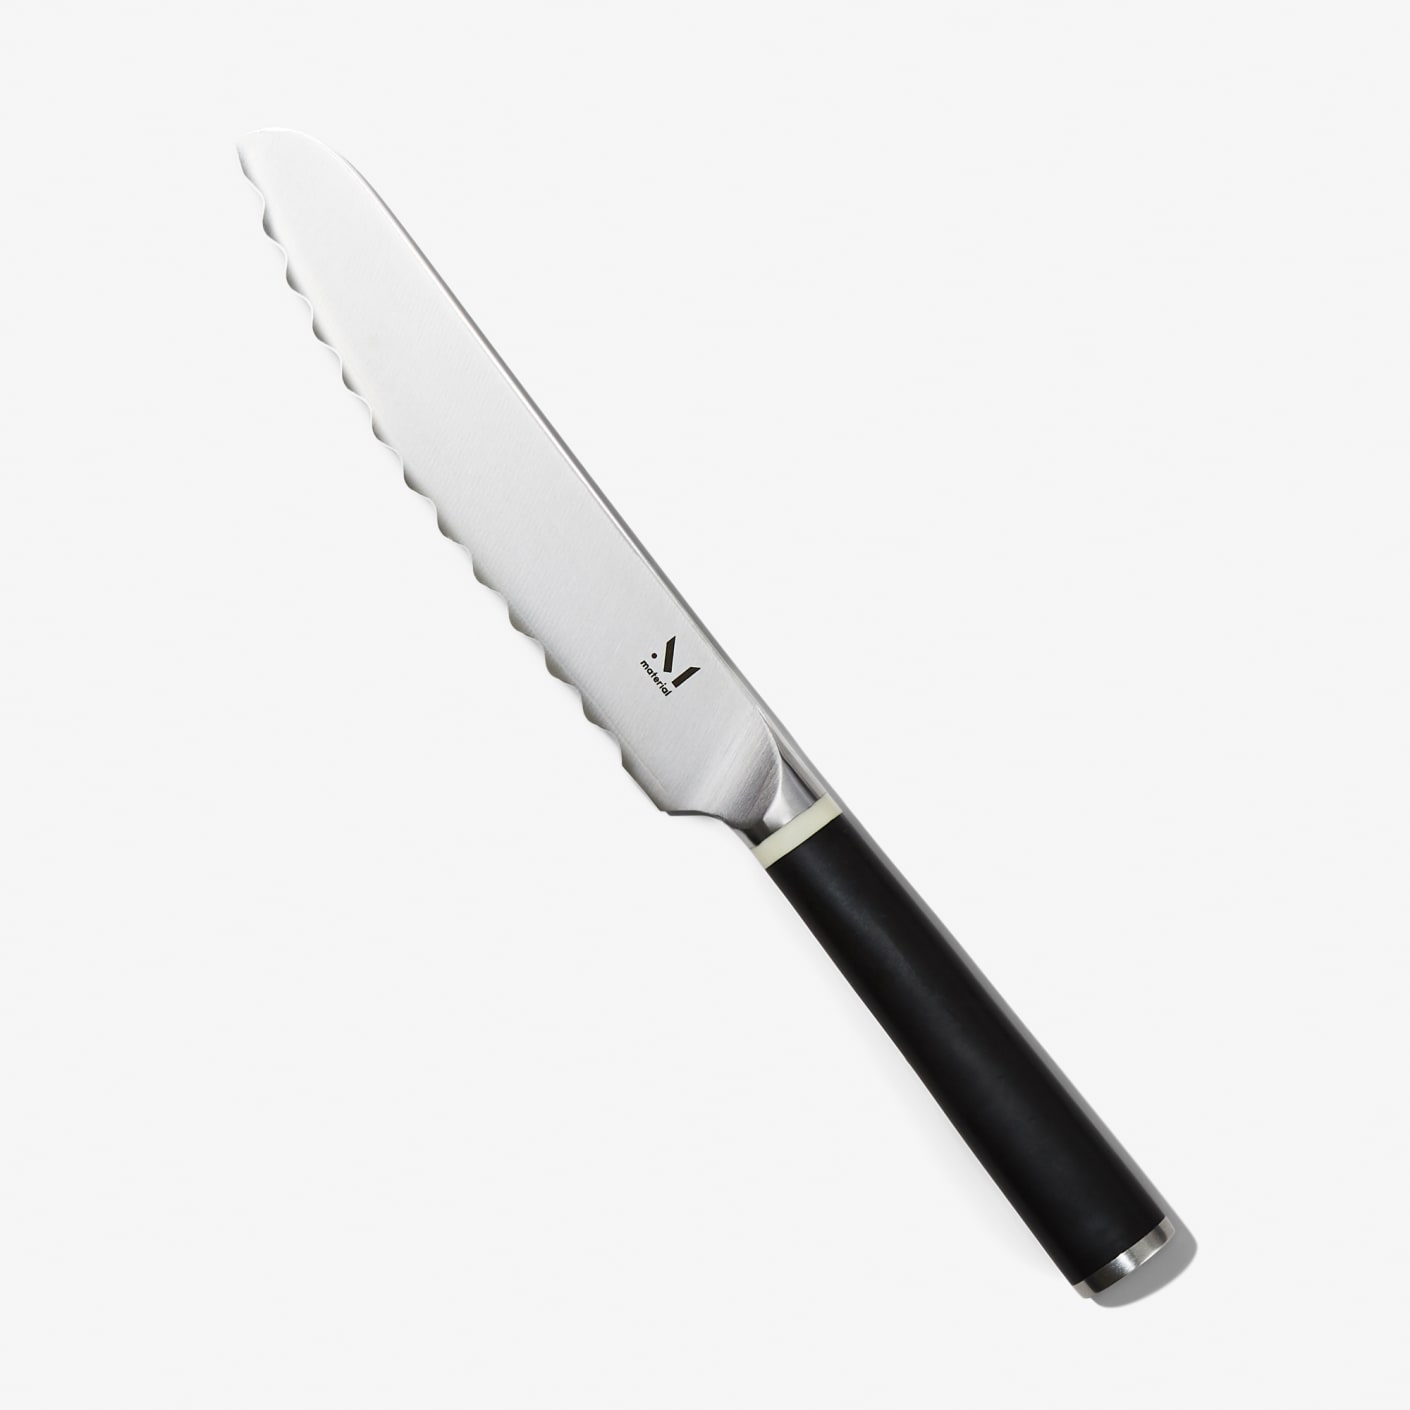 Material | The Serrated 6 Knife